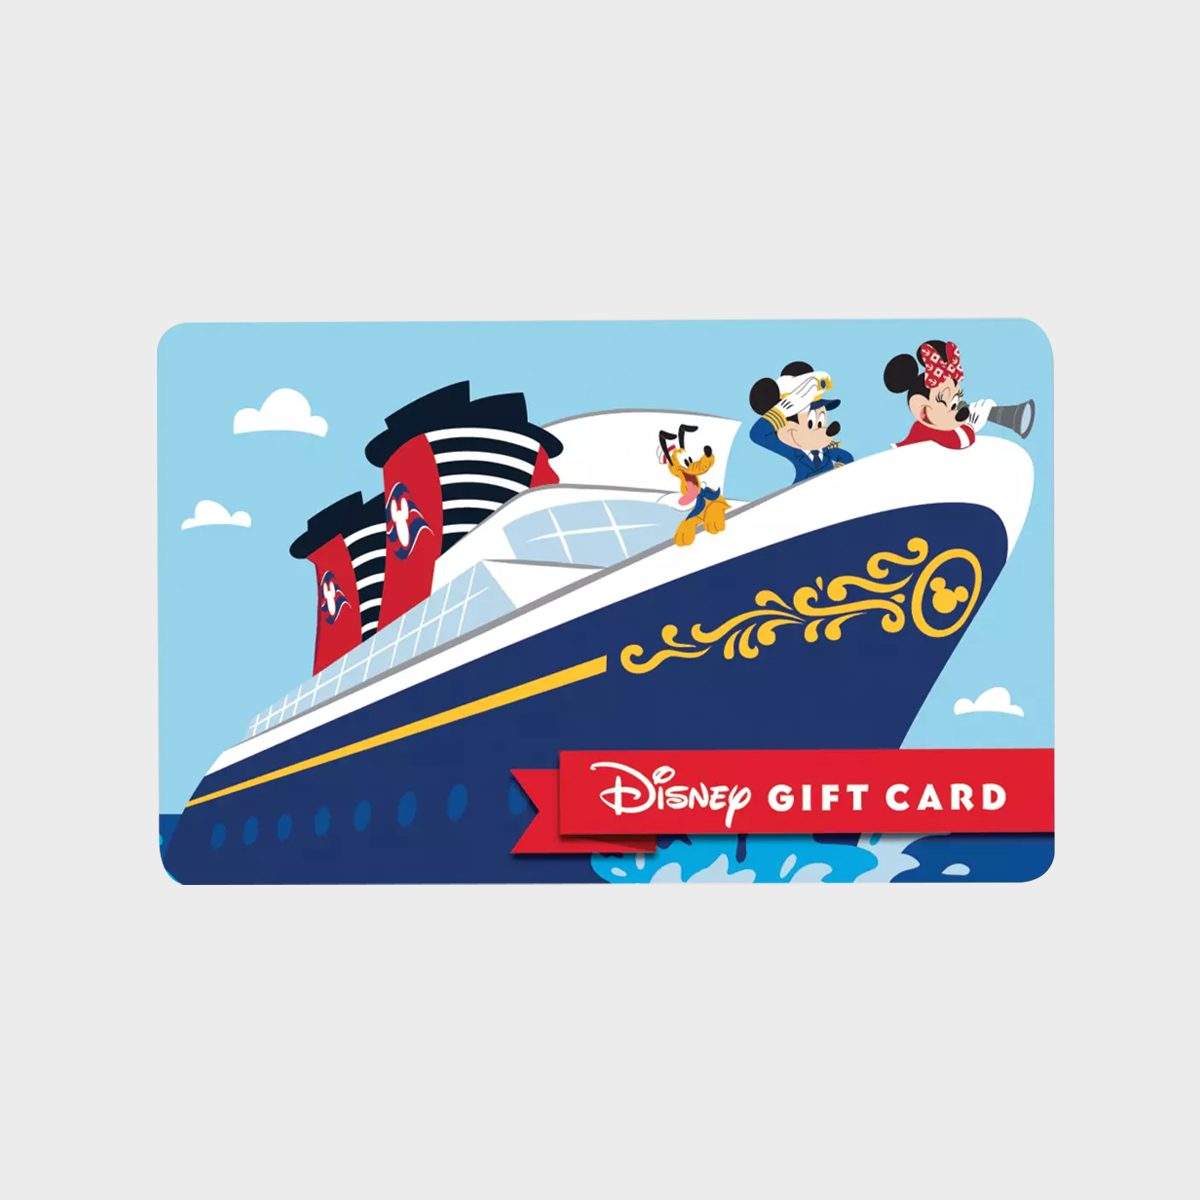 https://www.rd.com/wp-content/uploads/2023/02/Captain-Mickey-Mouse-and-Friends-Disney-Gift-Card-ecomm-shopdisney.com_.jpg?fit=700%2C700